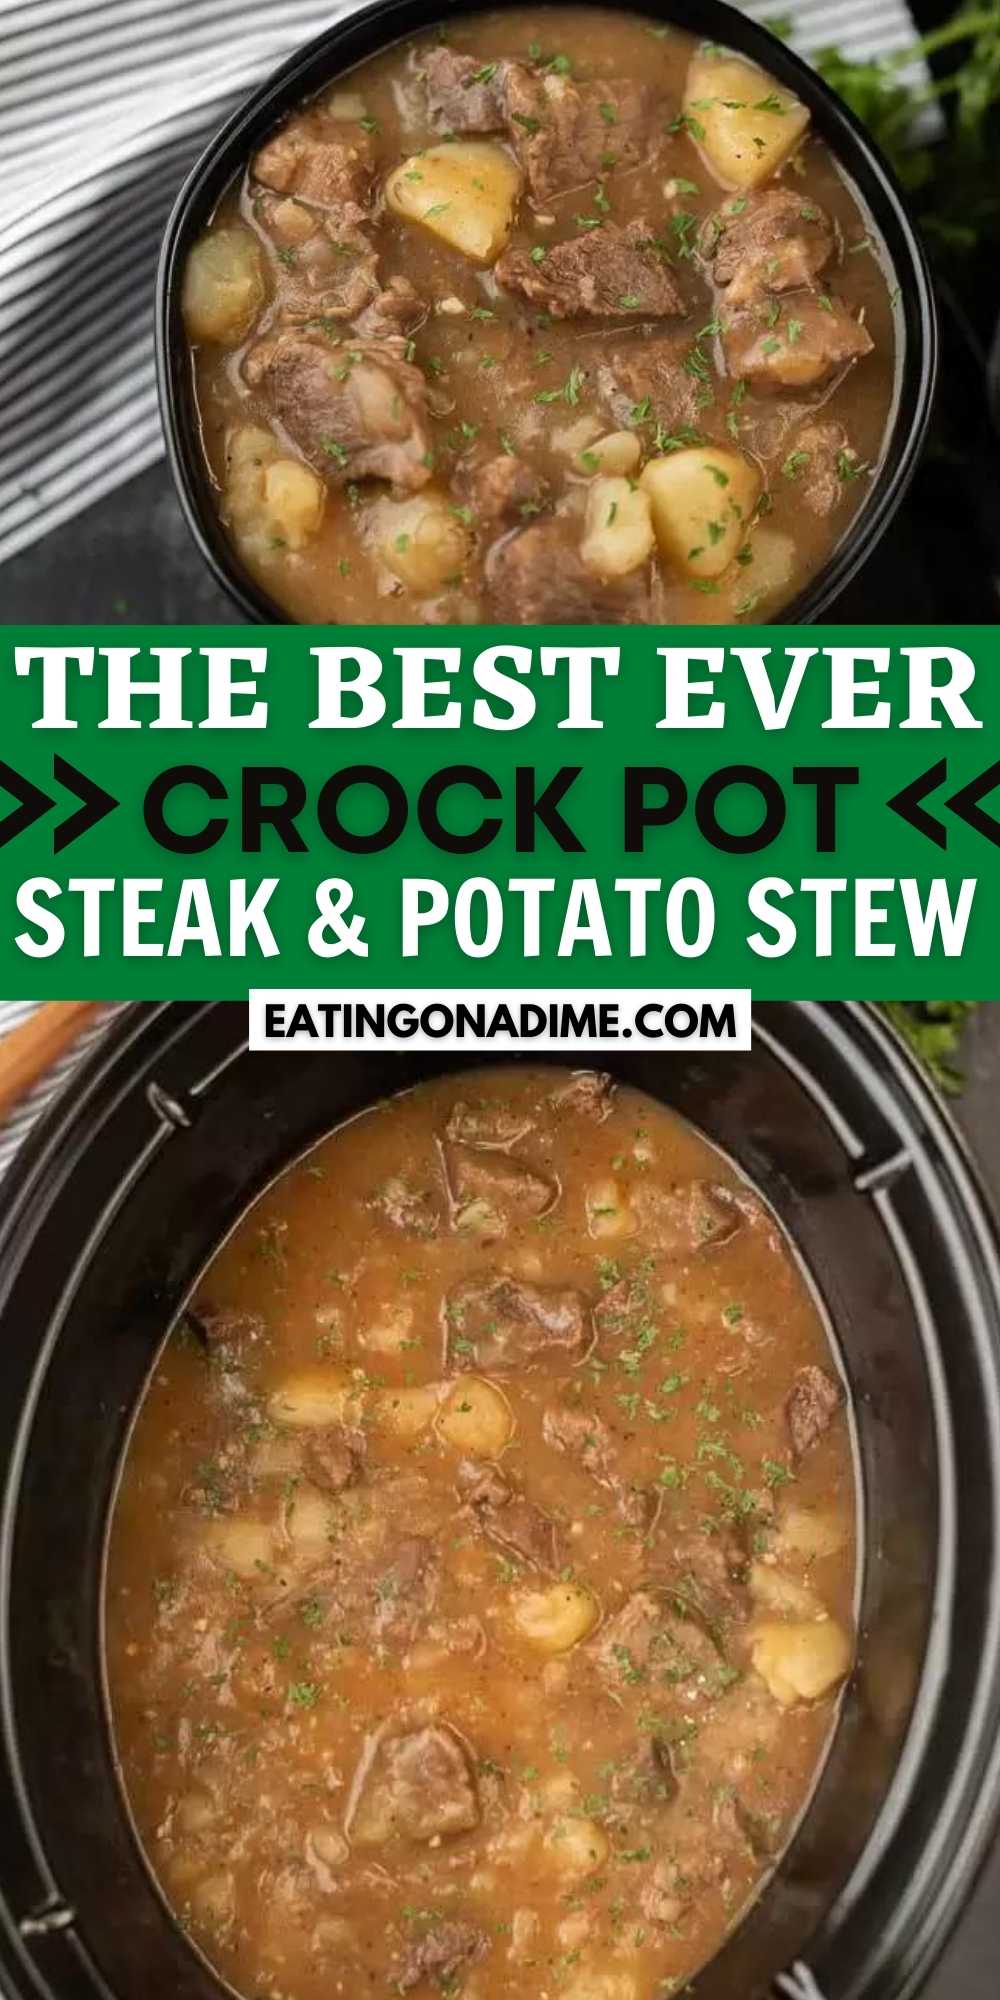 Crock pot steak and potato stew recipe is hearty and delicious. This easy slow cooker meal is the best comfort food and so filling too. Everyone will love this easy steak and potatoes beef stew recipe that is easy to make in a slow cooker! #eatingonadime #crockpotrecipes #slowcookerrecipes #stewrecipes #beefrecipes 
